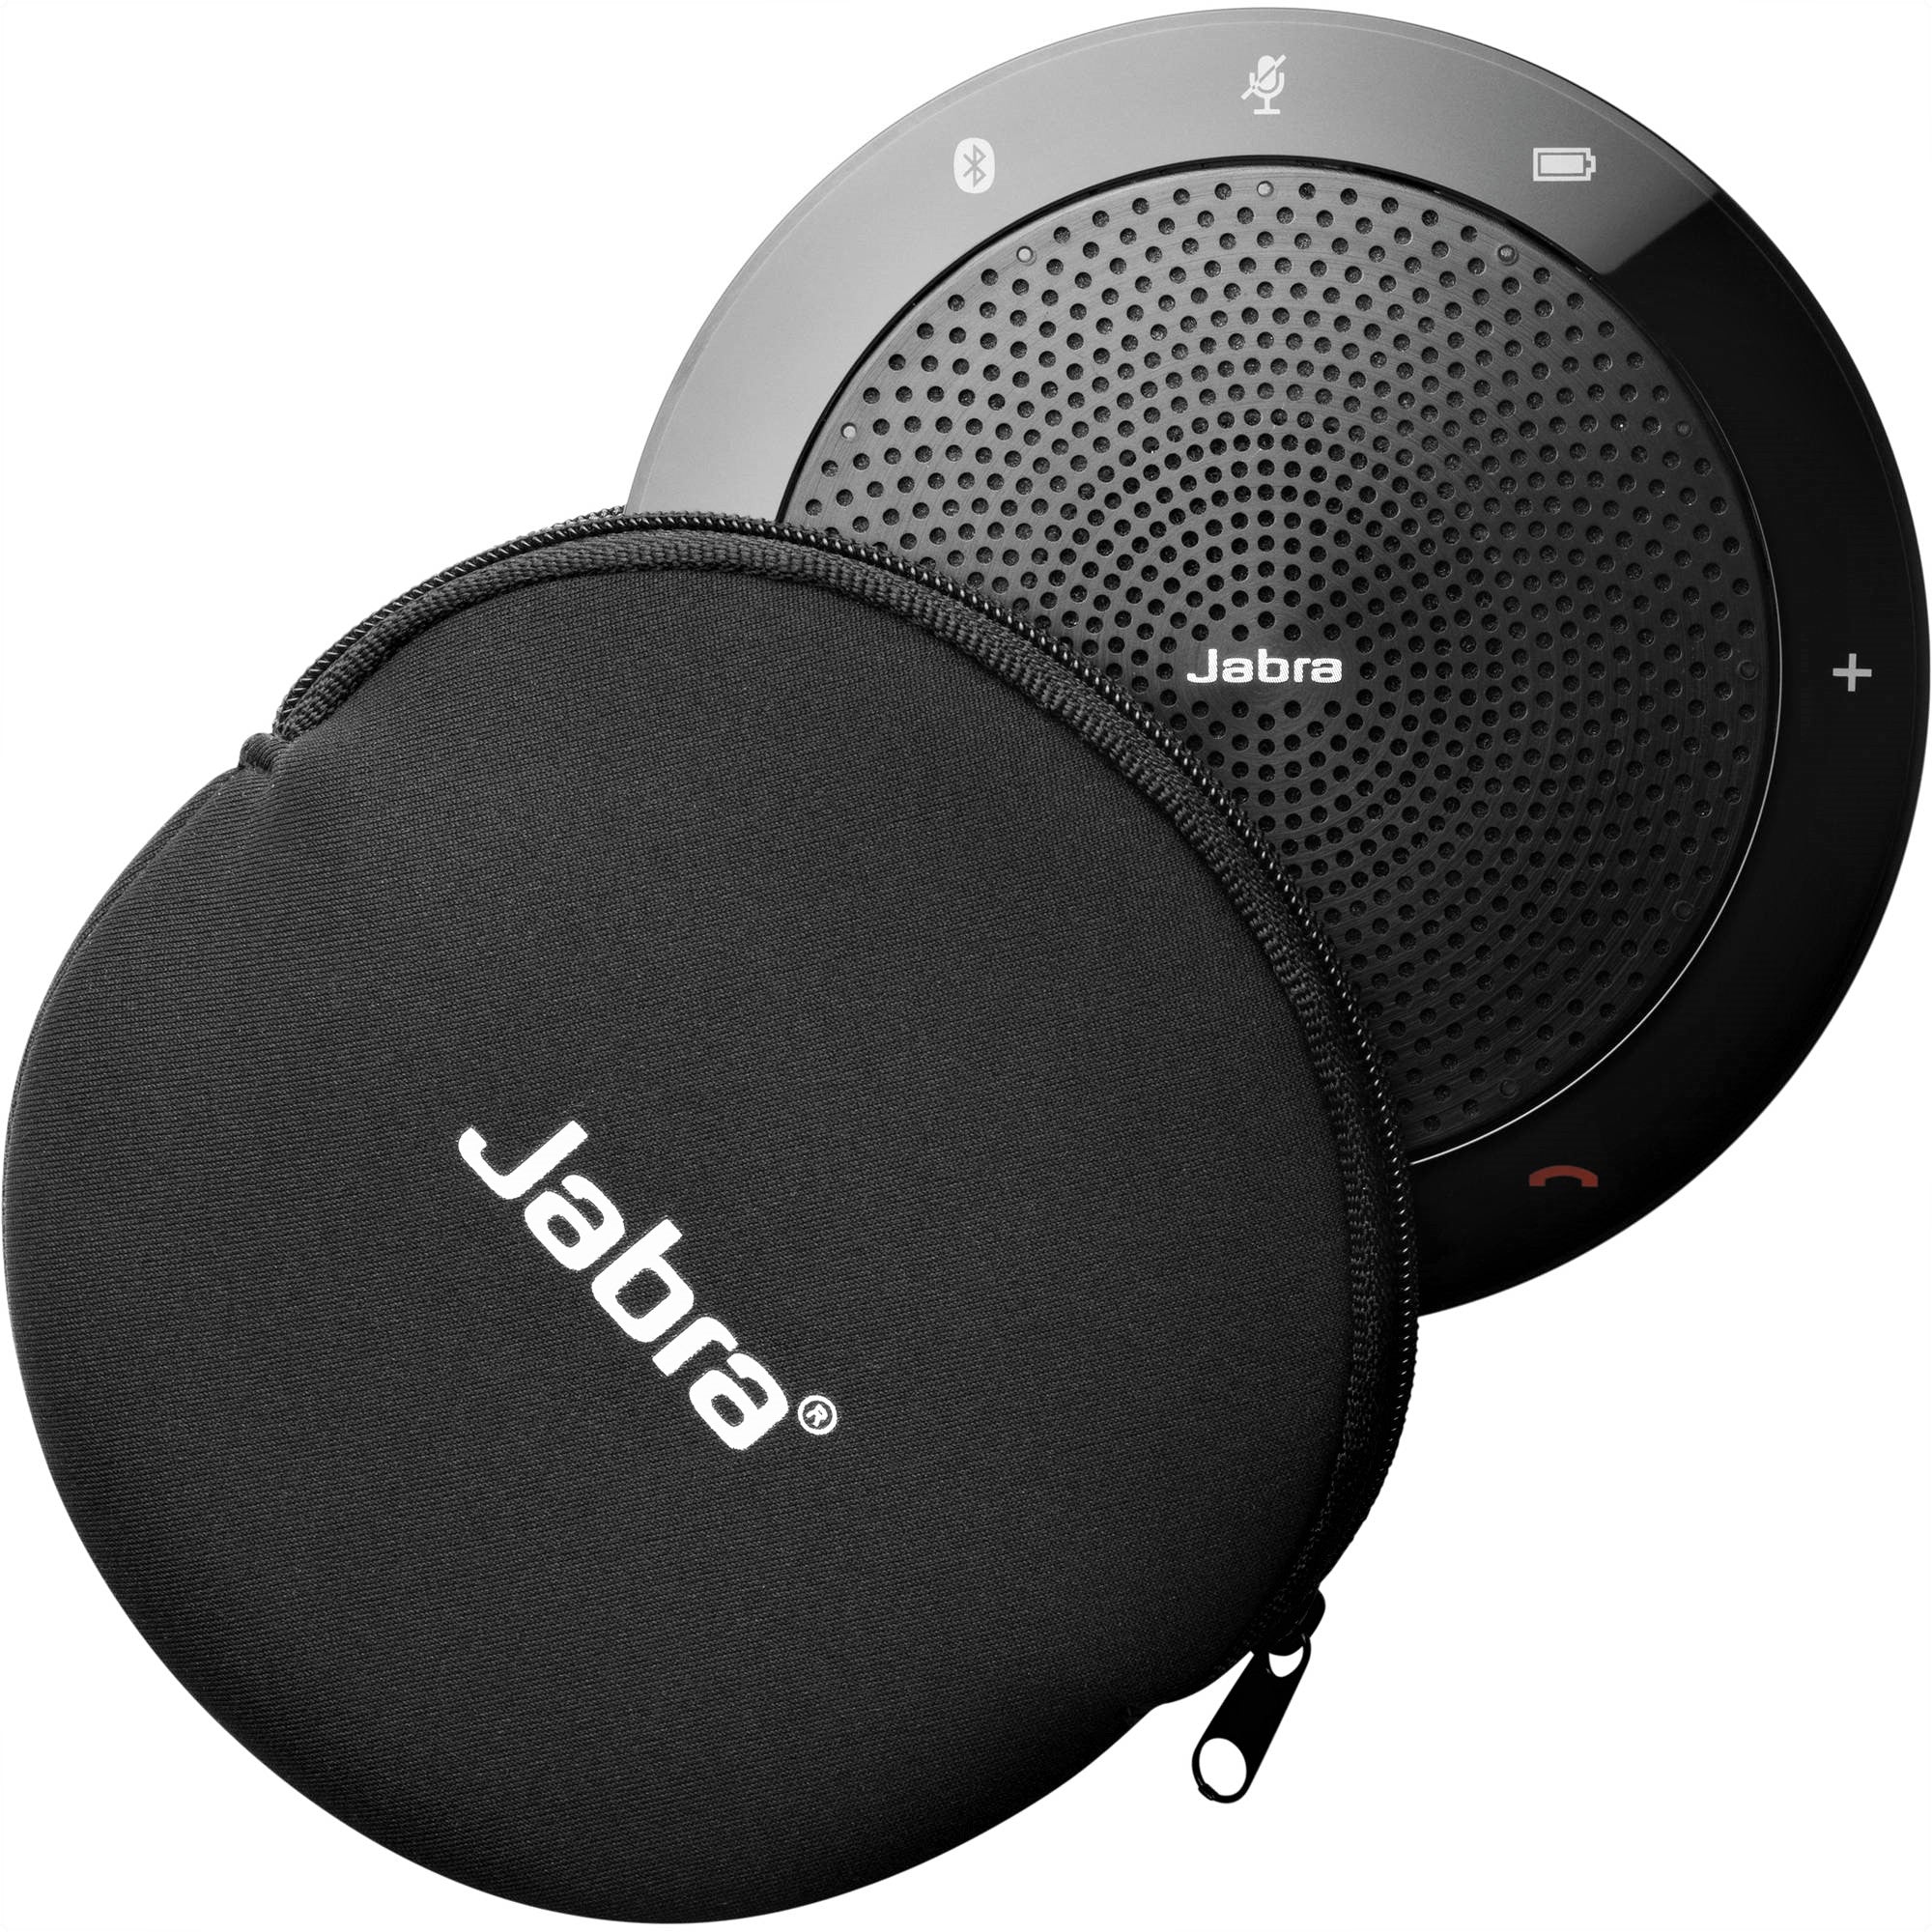 Jabra Speak 510 MS USB & Bluetooth Speakerphone (Skype for Business) with Pouch